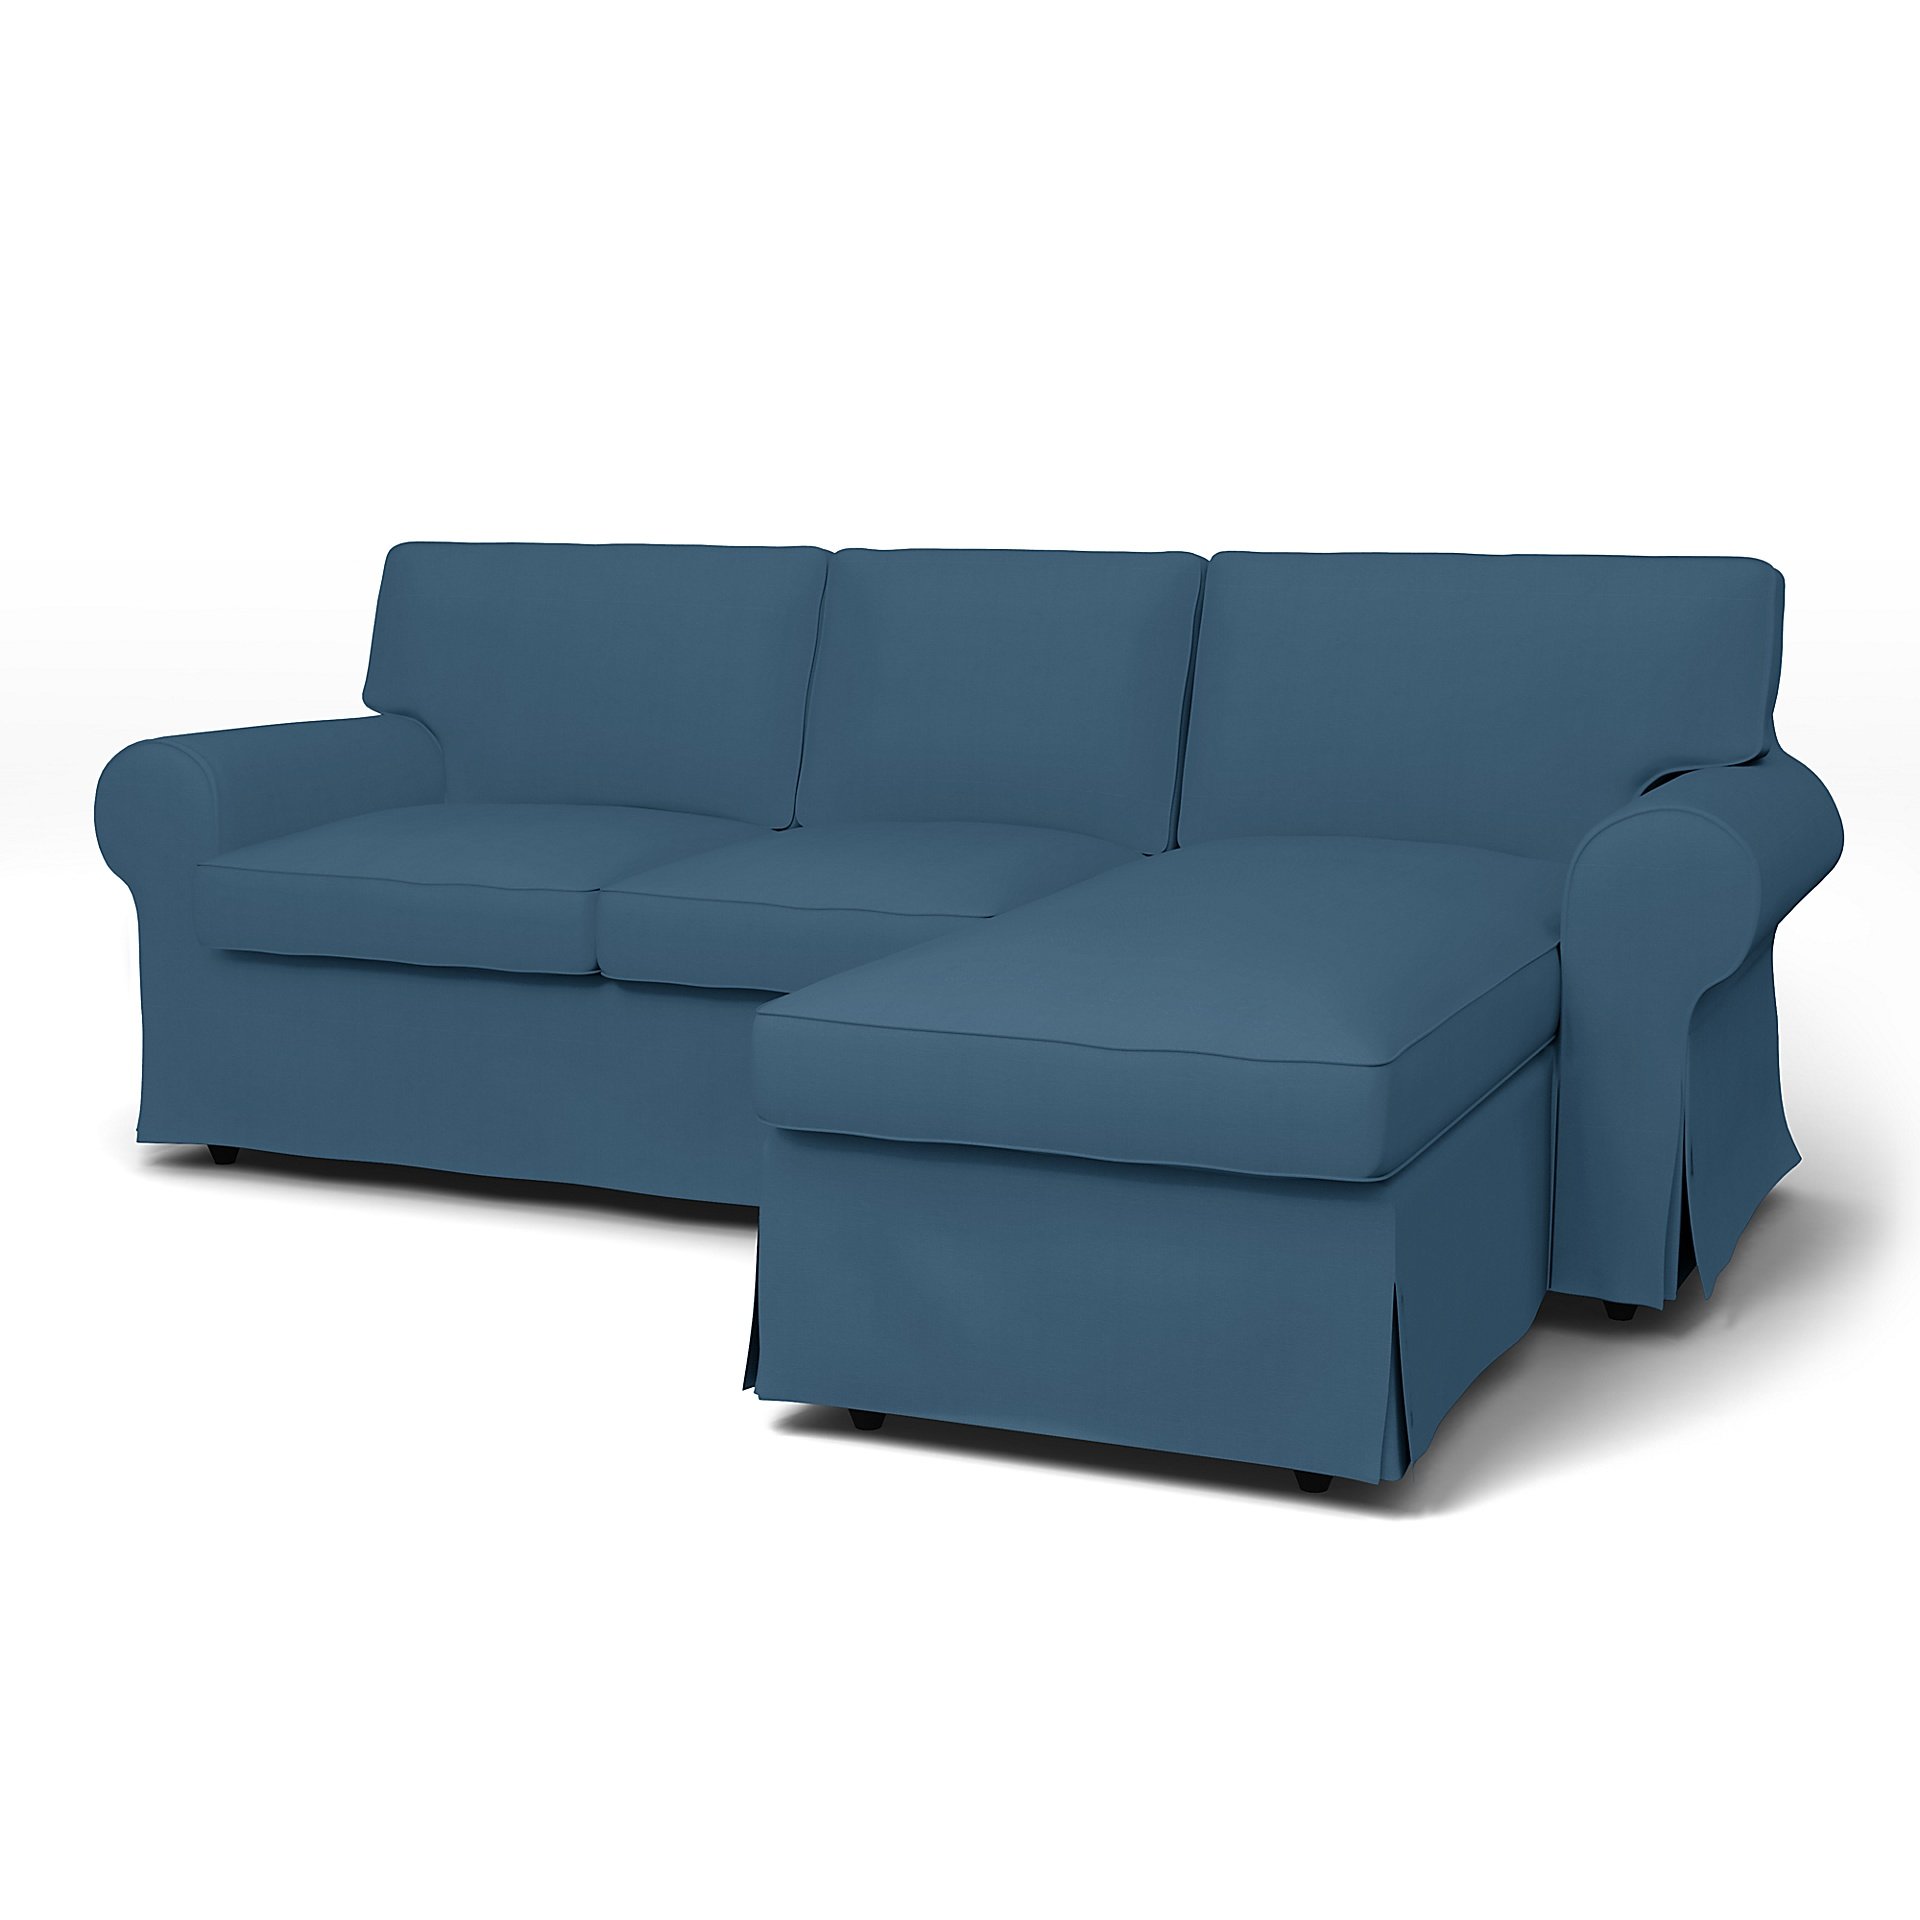 IKEA - Ektorp 3 Seater Sofa with Chaise Cover, Real Teal, Cotton - Bemz